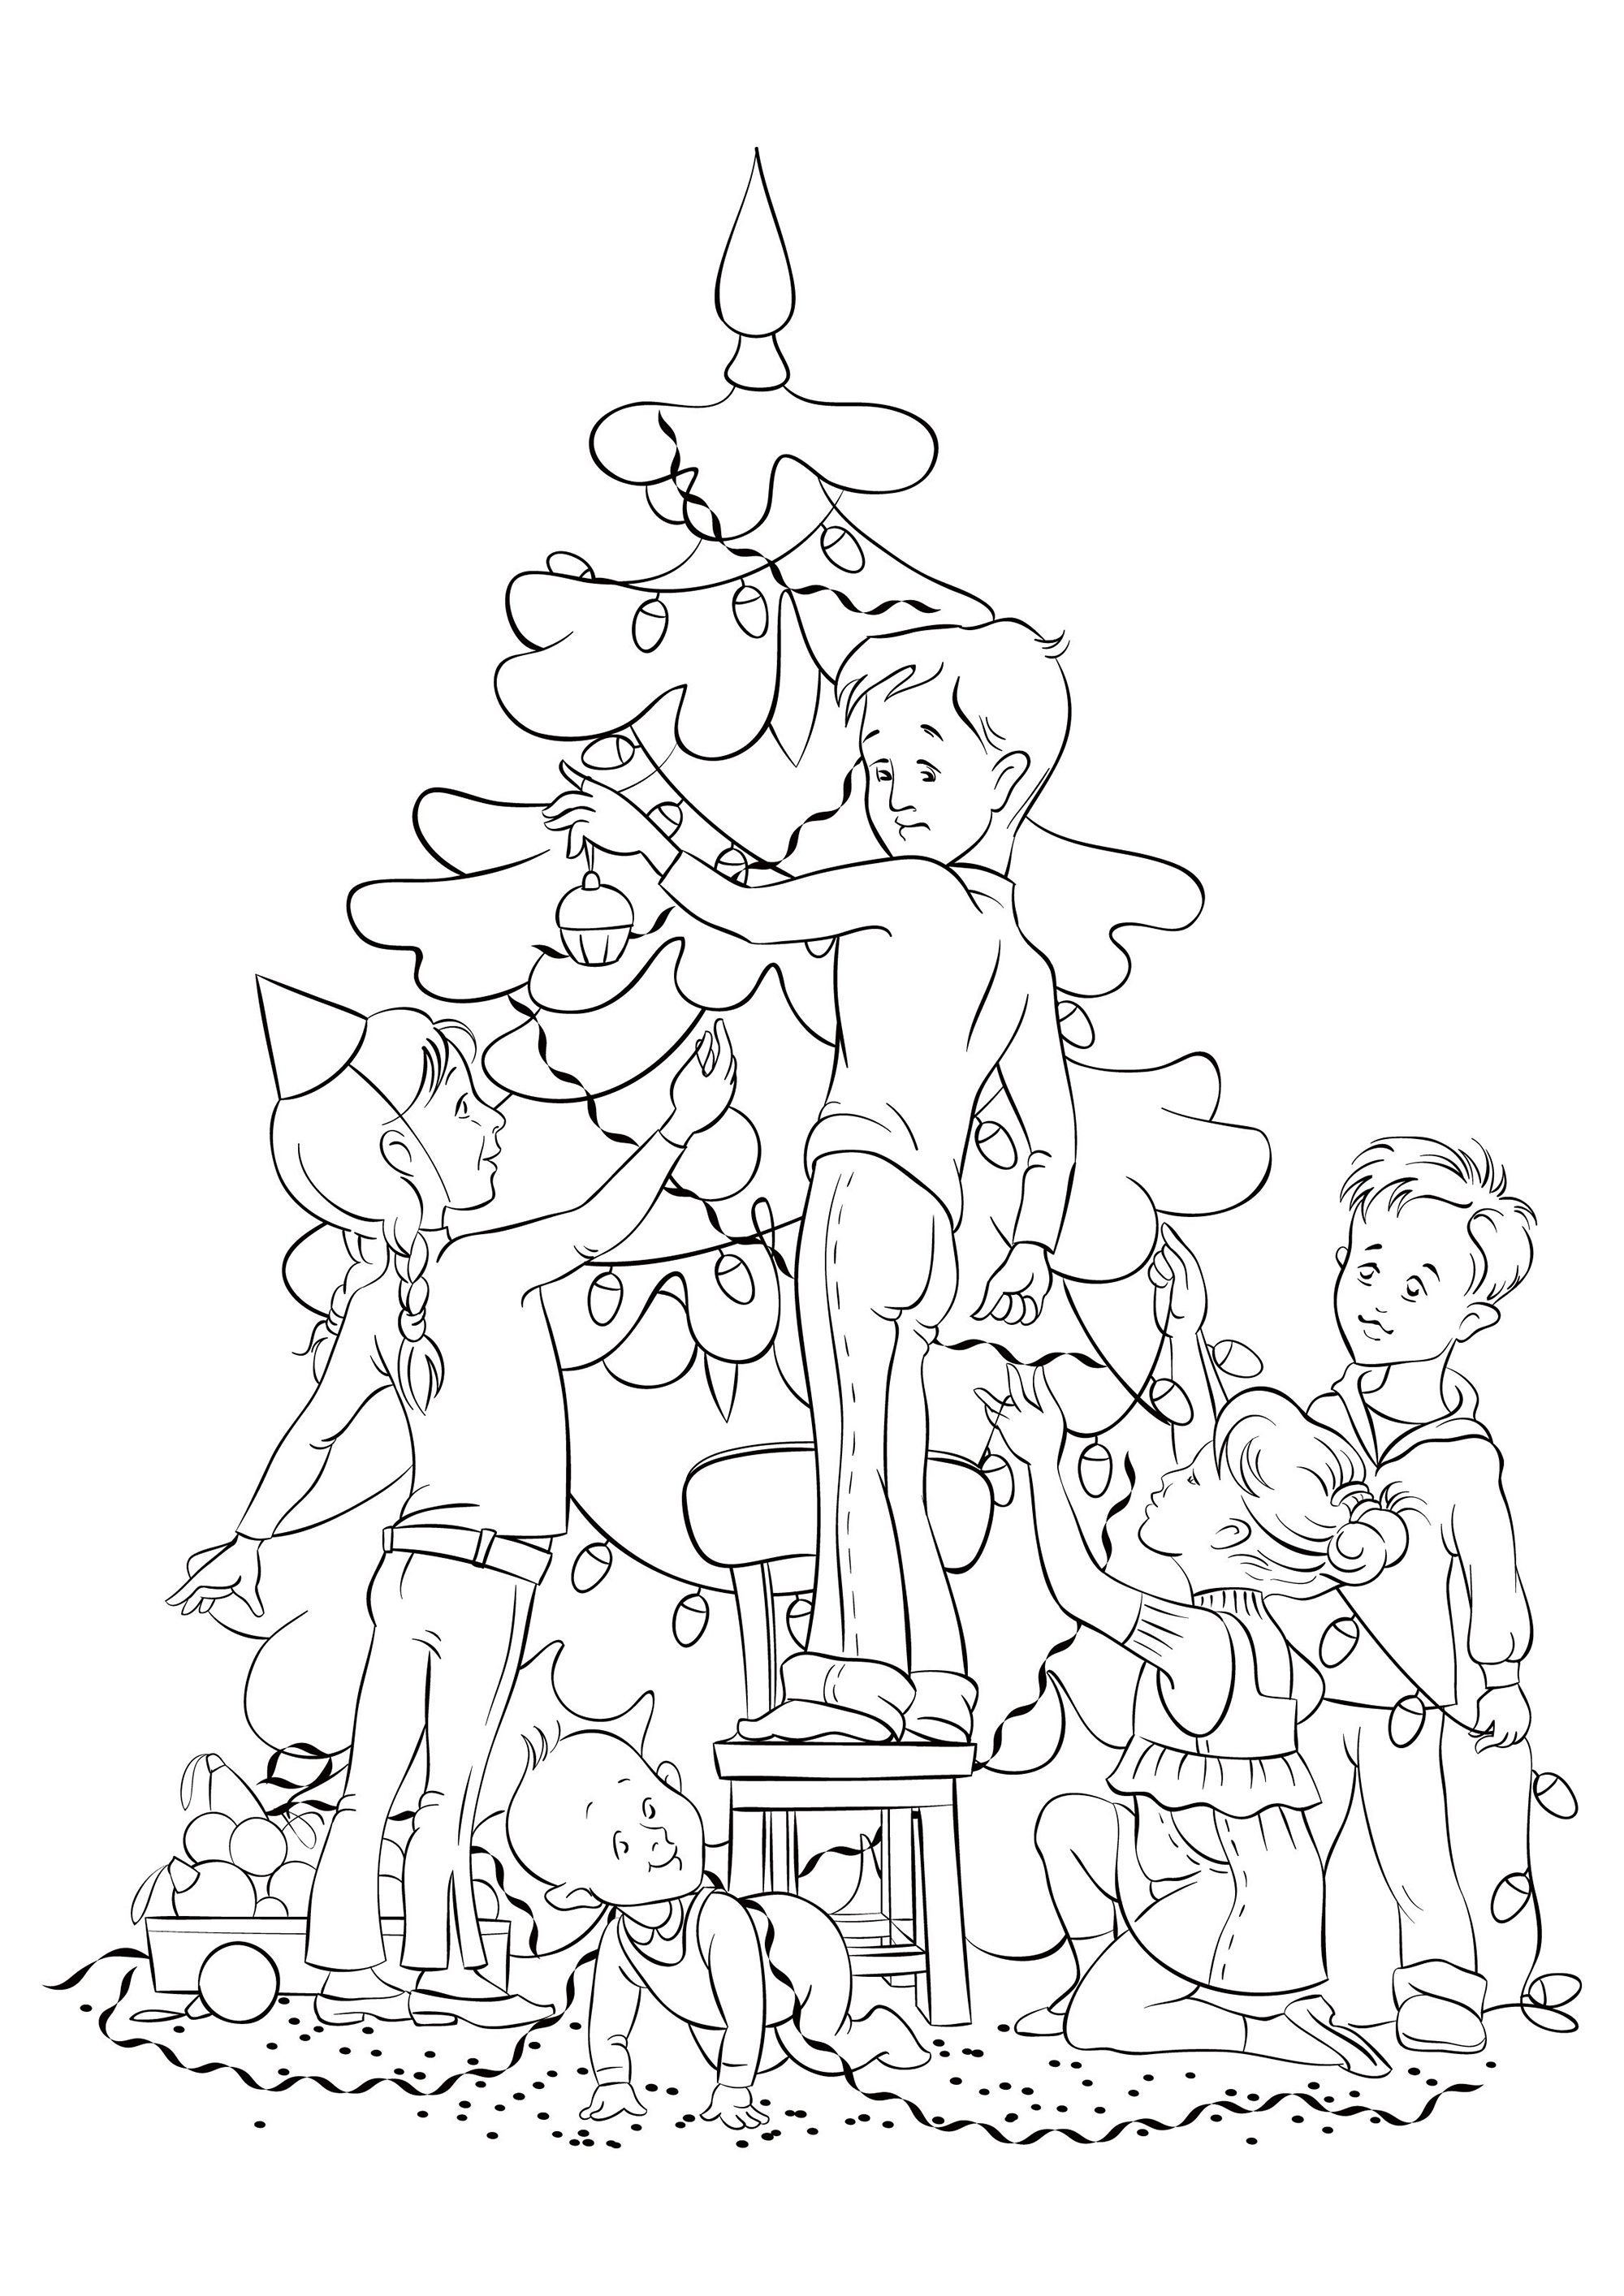 Coloring page representing children of all ages decorating a Christmas tree, Source : 123rf   Artist : regina555